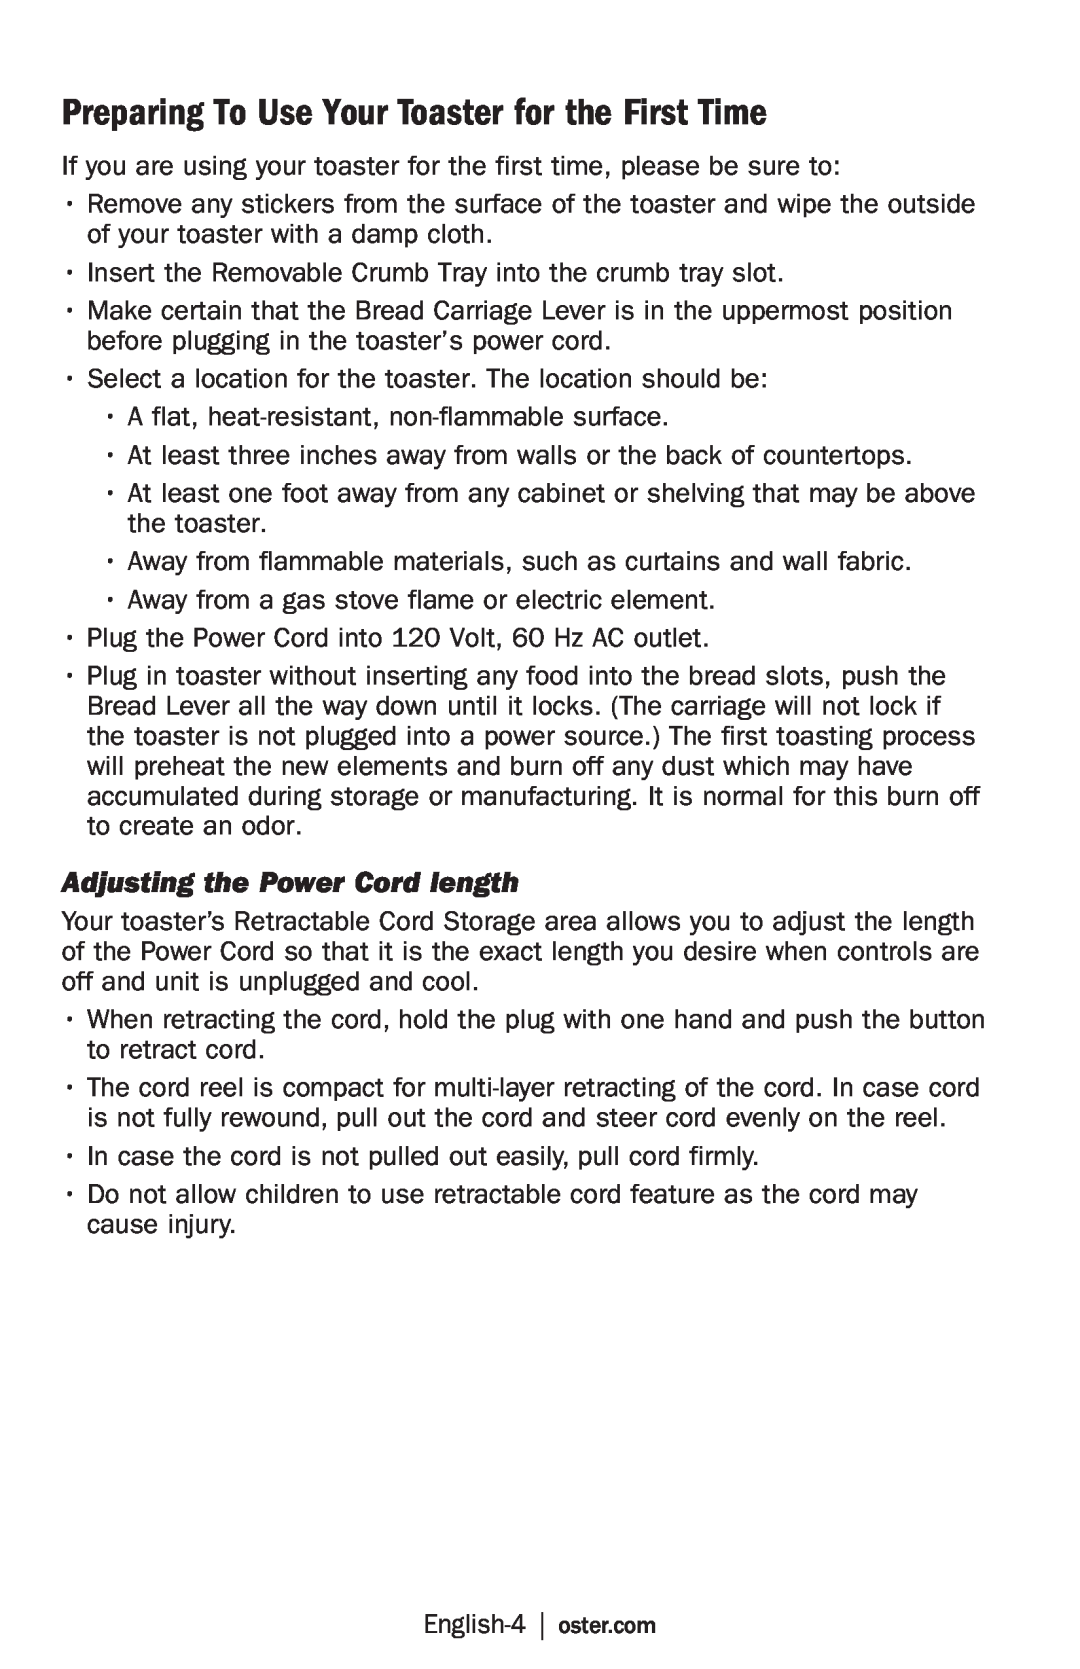 Oster TSSTRTS2S2 user manual Preparing To Use Your Toaster for the First Time, Adjusting the Power Cord length 